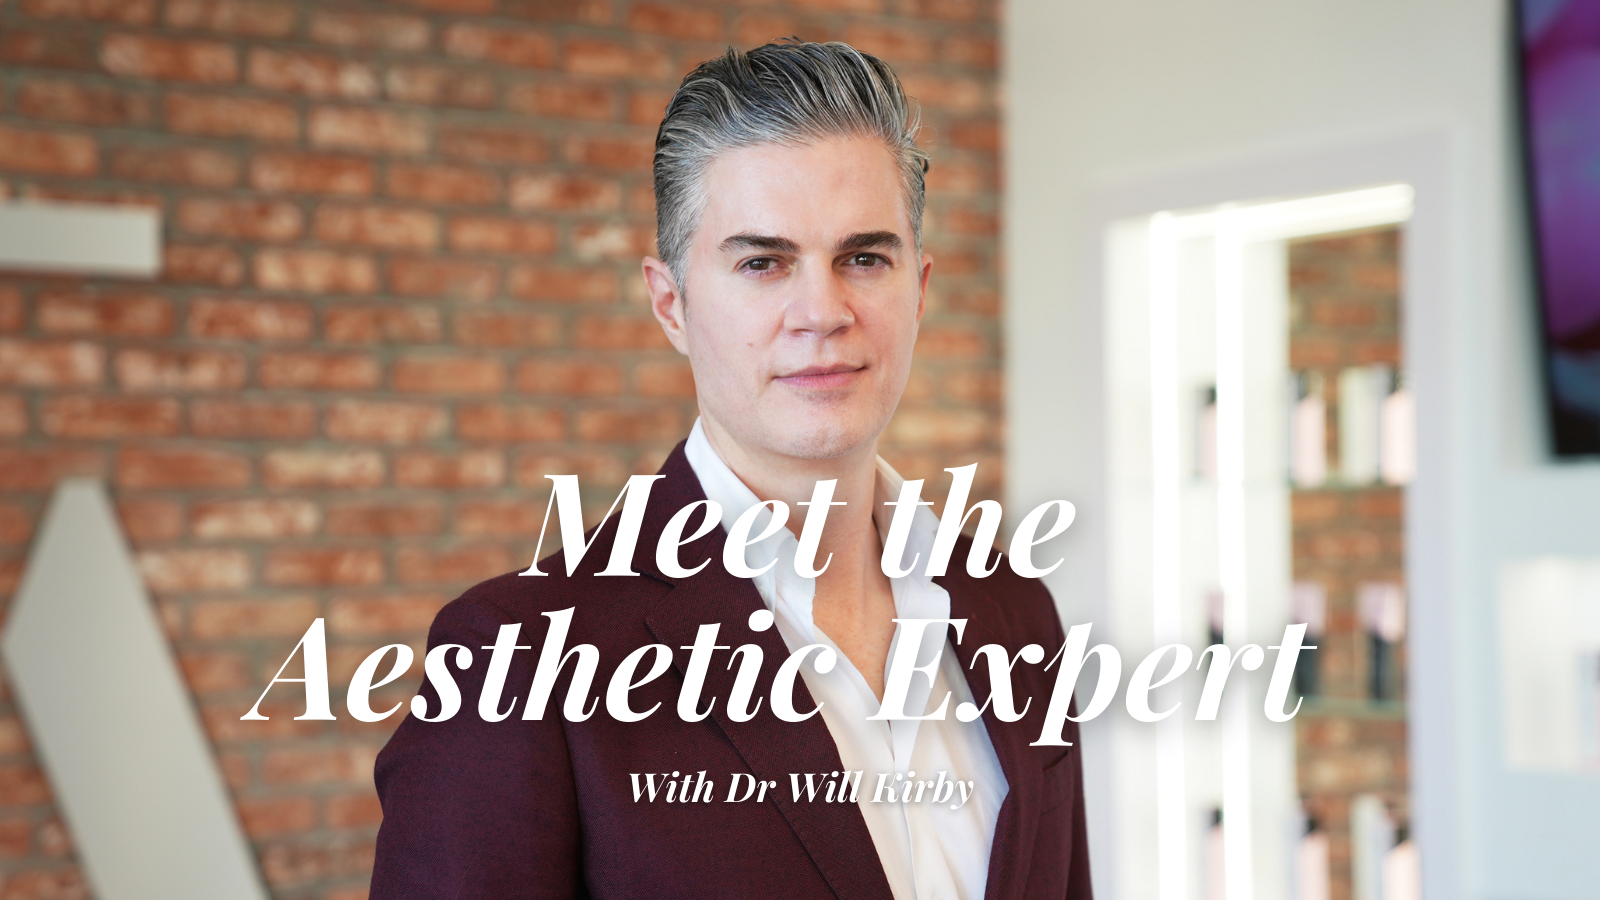 Meet the Aesthetic Expert with Dr Will Kirby